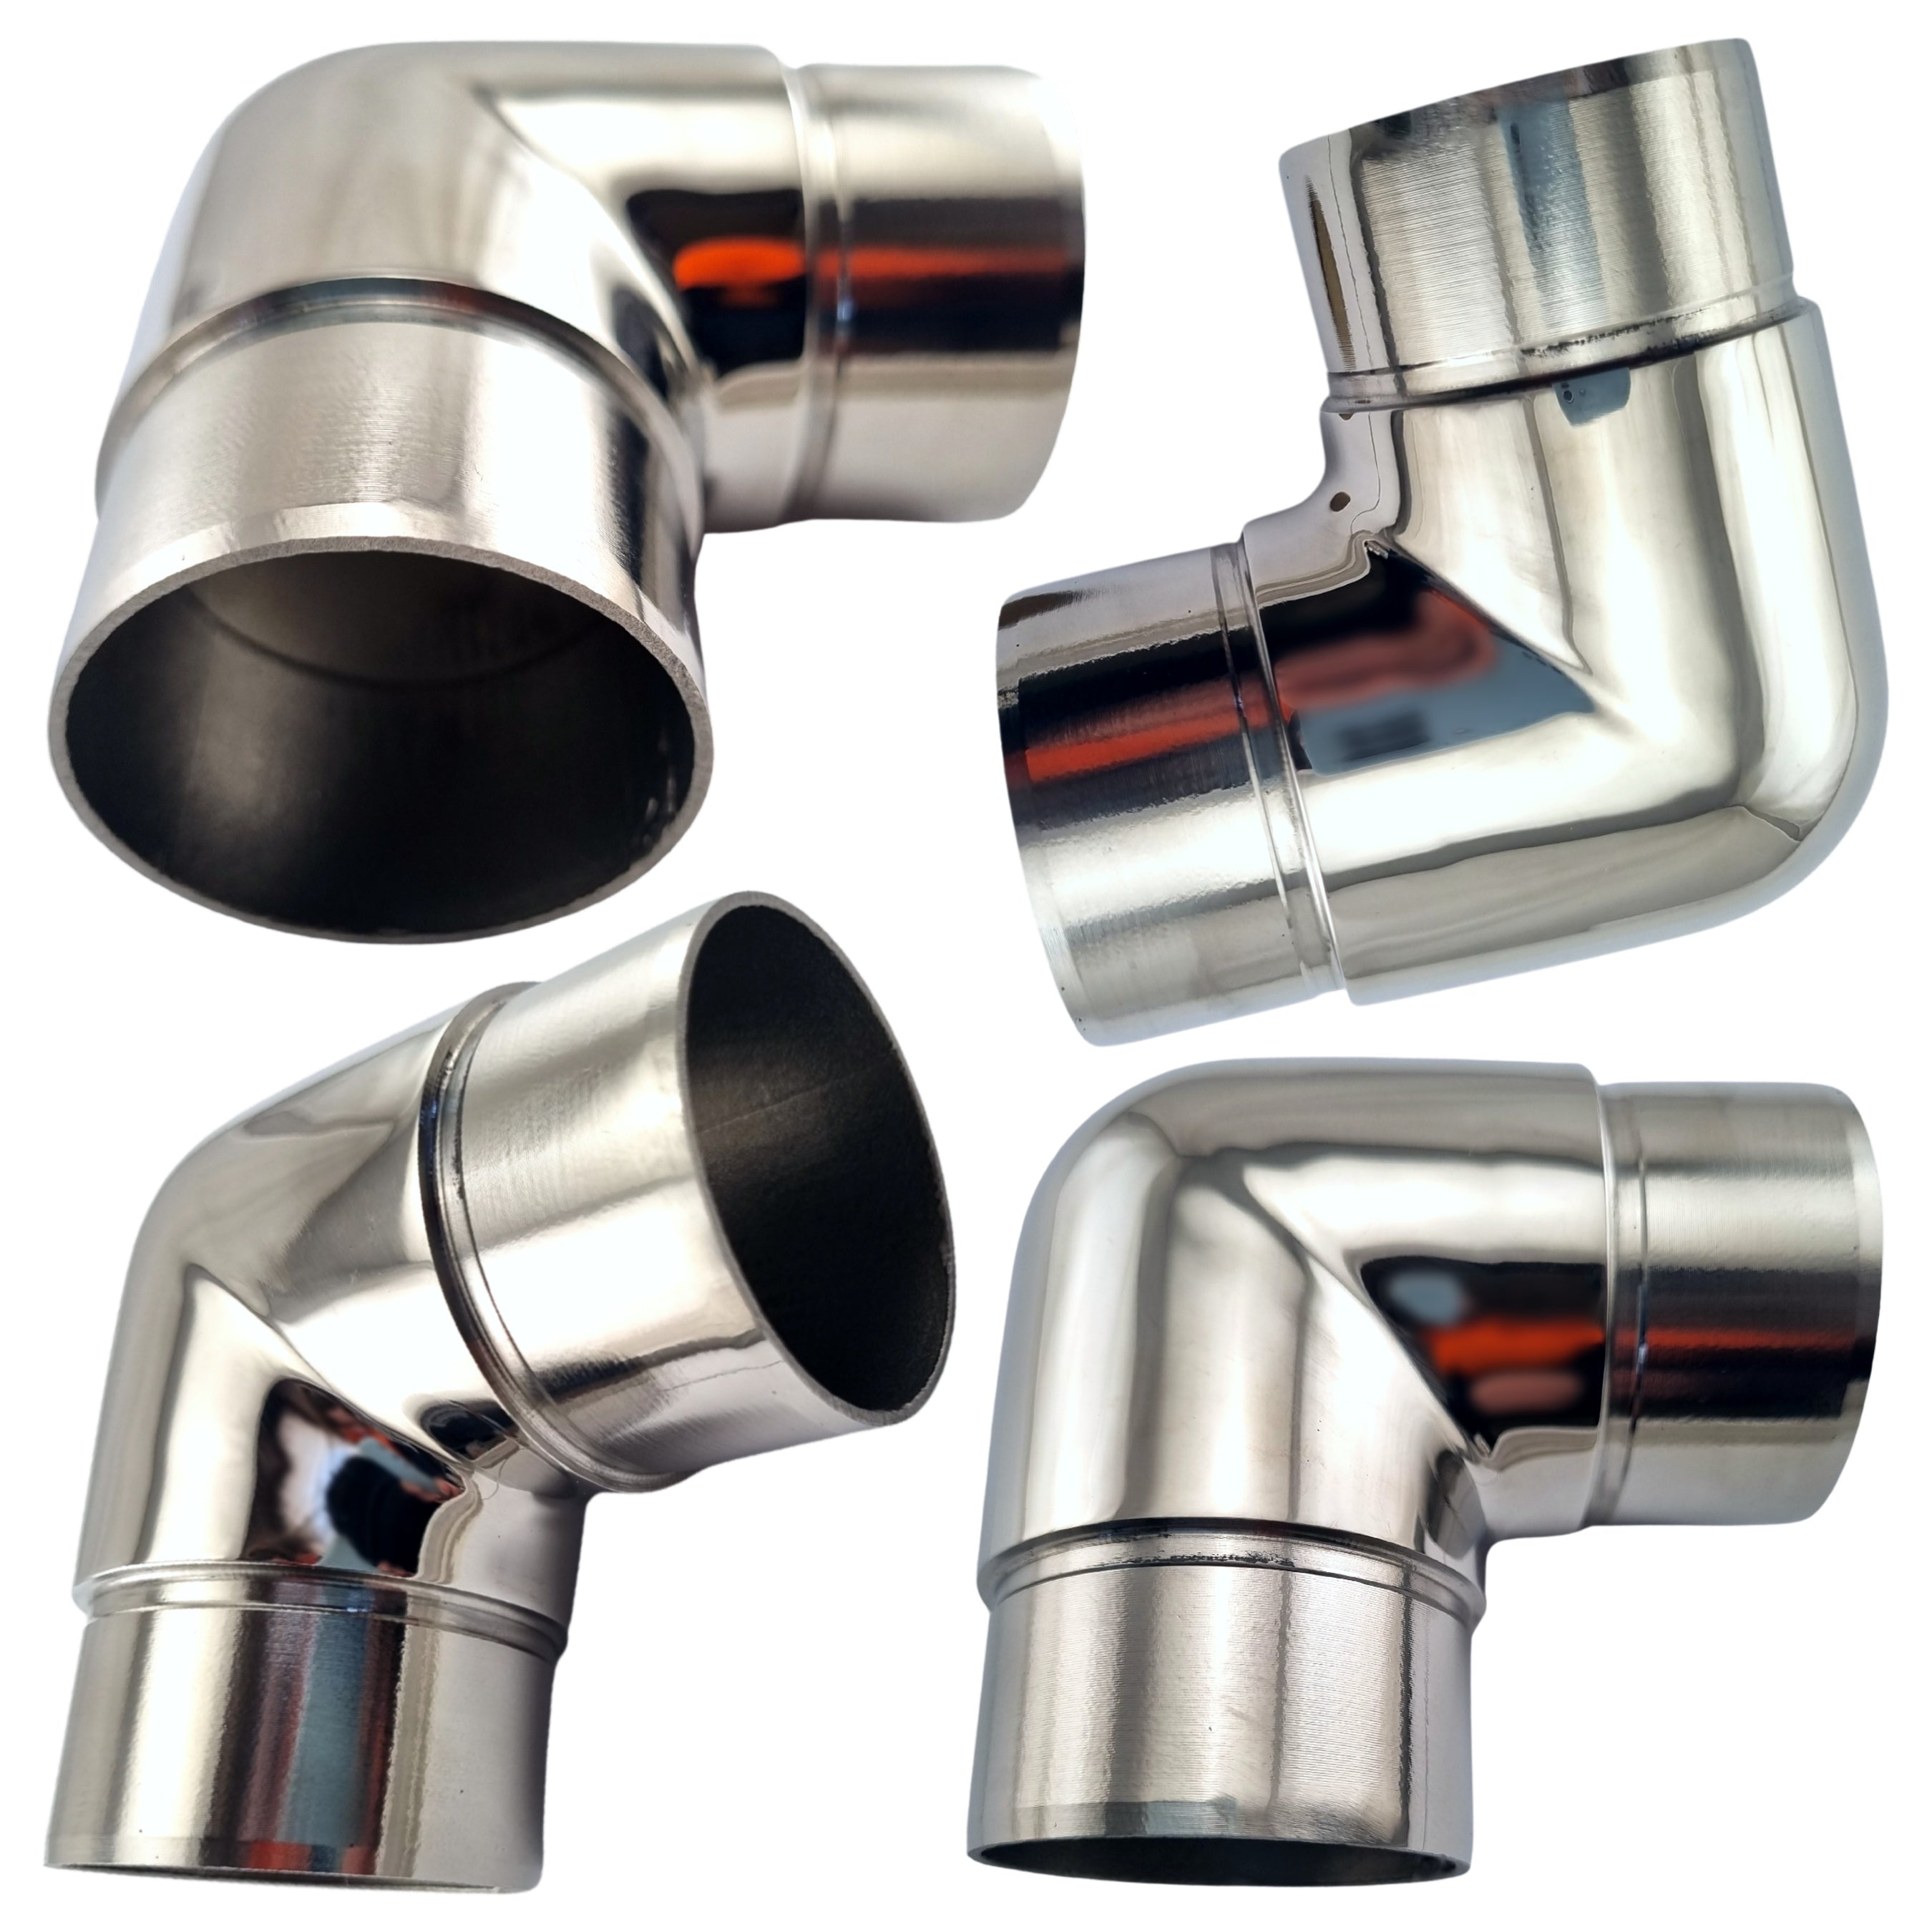 90° Sharp Corner Stainless Steel Rail Fitting for 50.8mm pipe. Australia wide shipping. Shop: chain.com.au